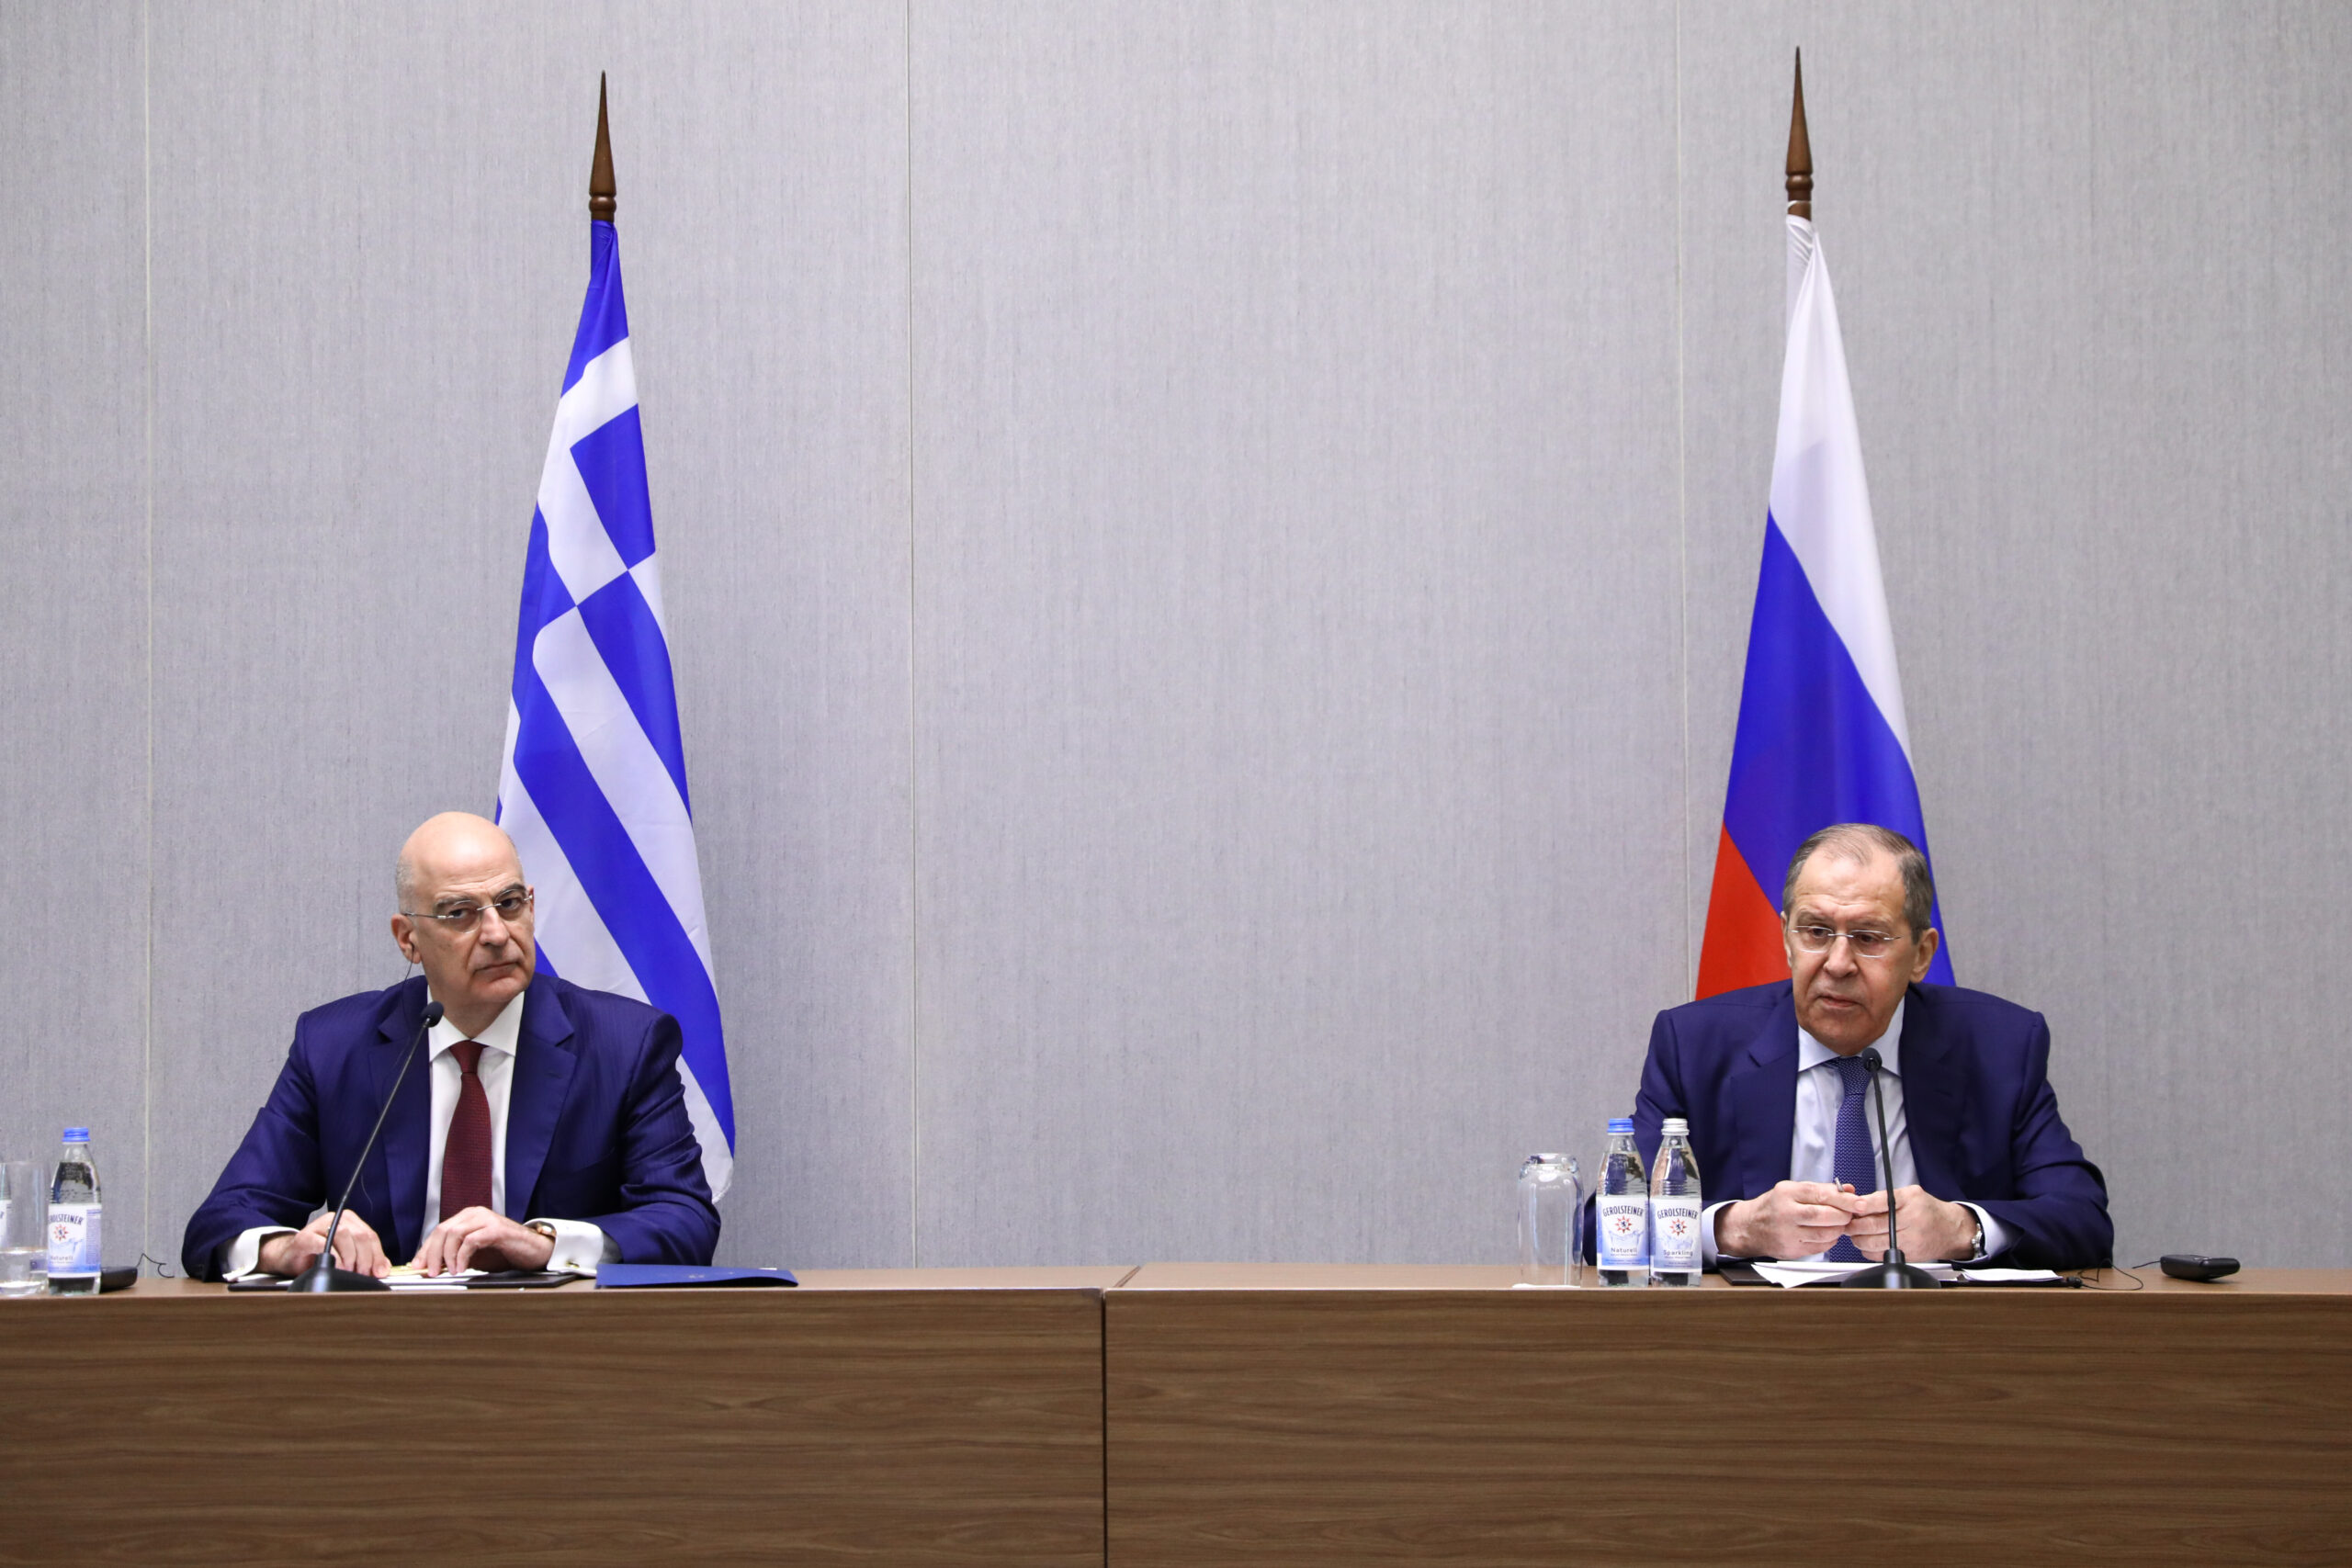 Greek Foreign Minister Nikos Dendias in Moscow for a meeting with Lavrov tomorrow